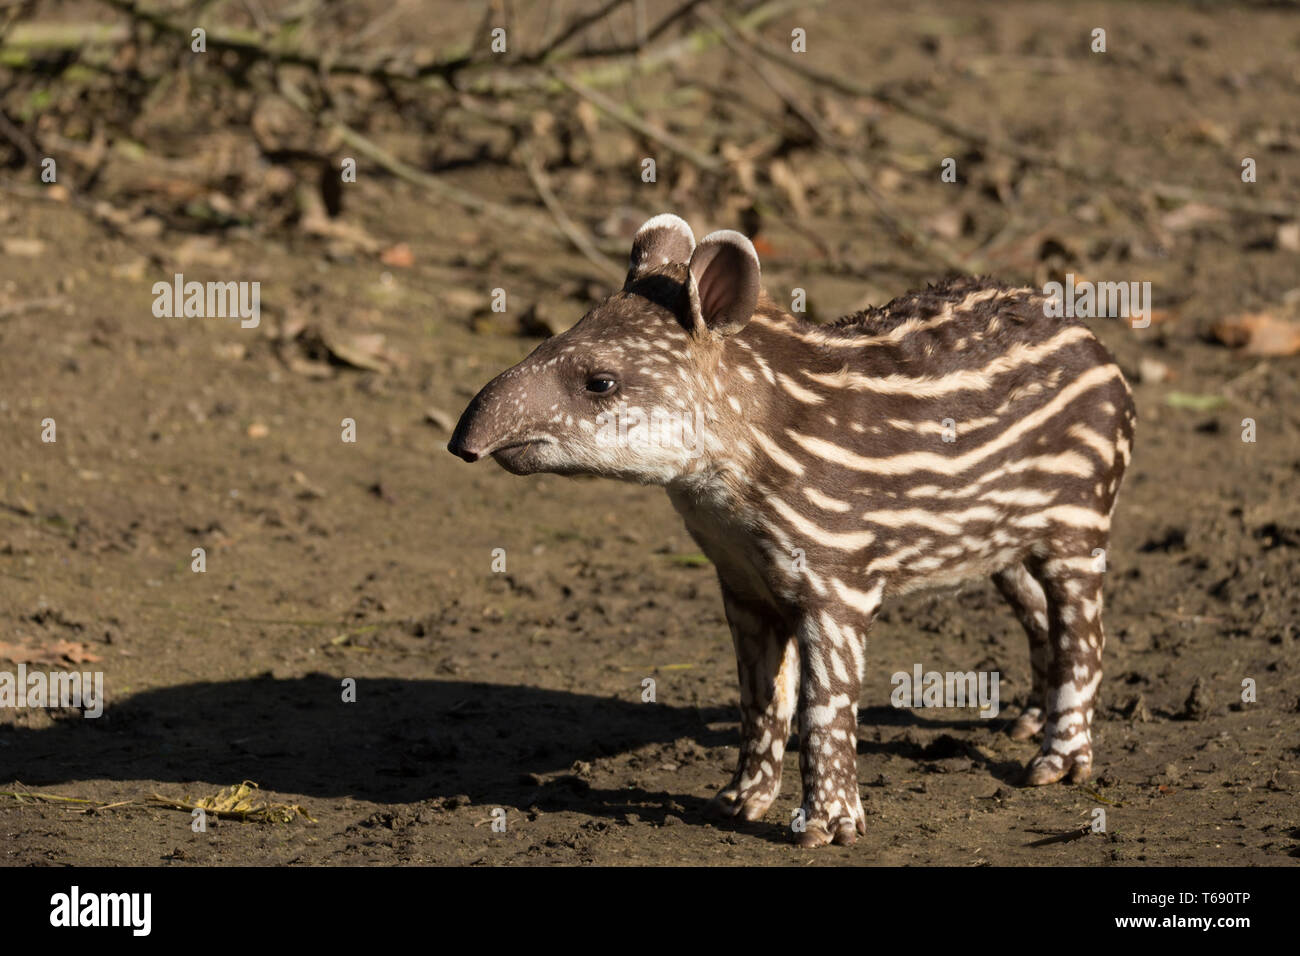 baby of the endangered South American tapir Stock Photo